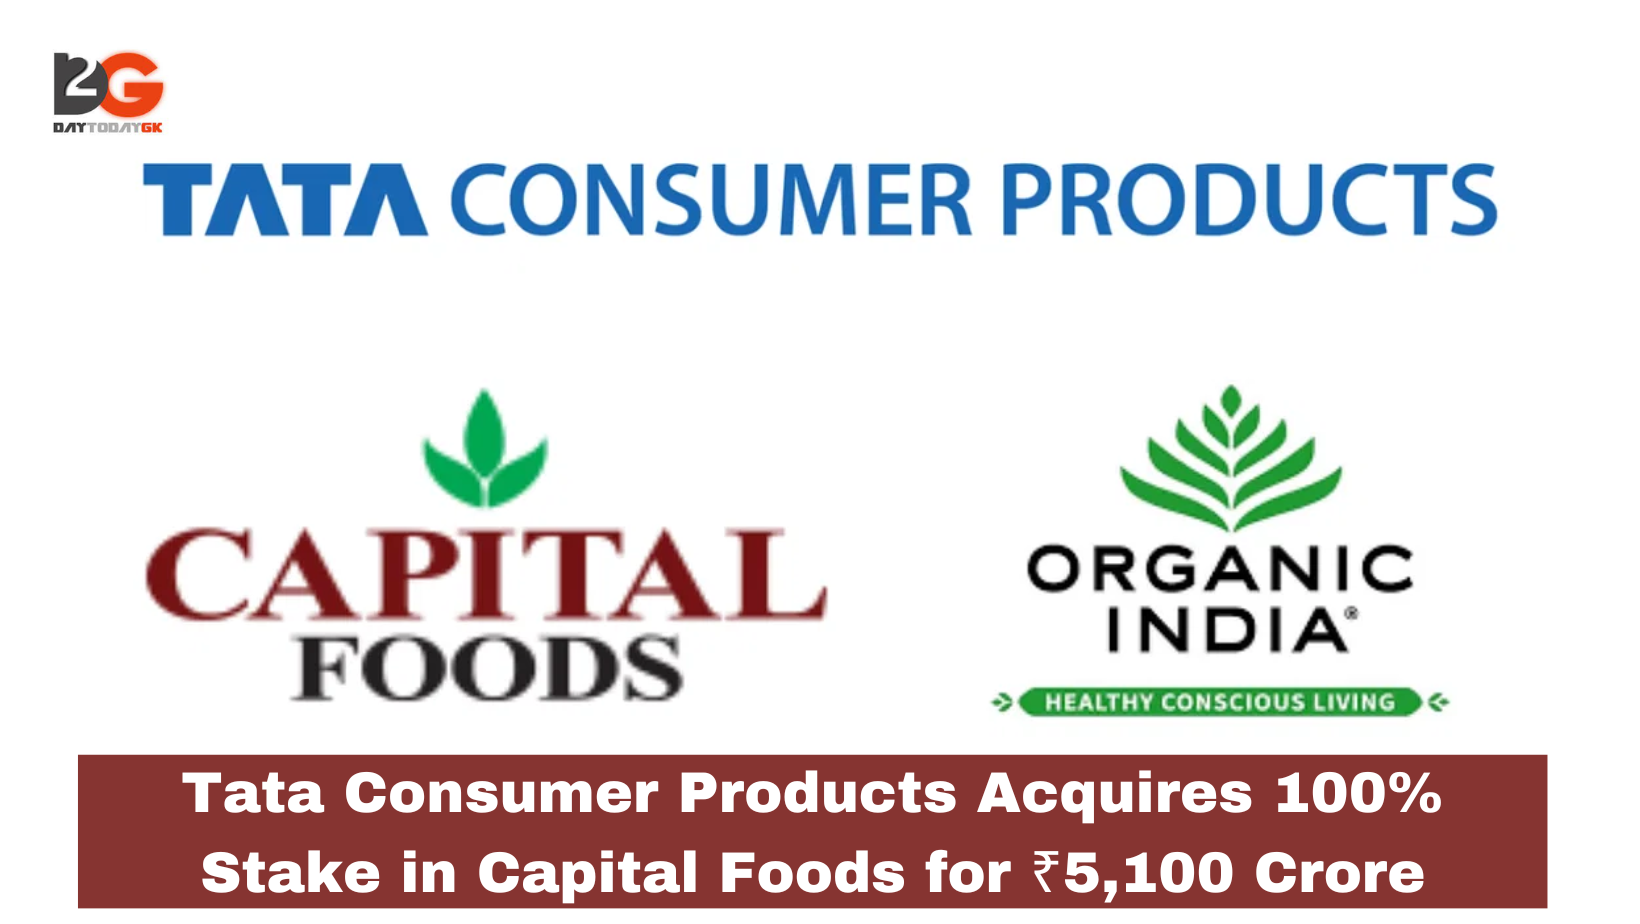 Tata Consumer Products Acquires 100% Stake in Capital Foods for ₹5,100 Crore